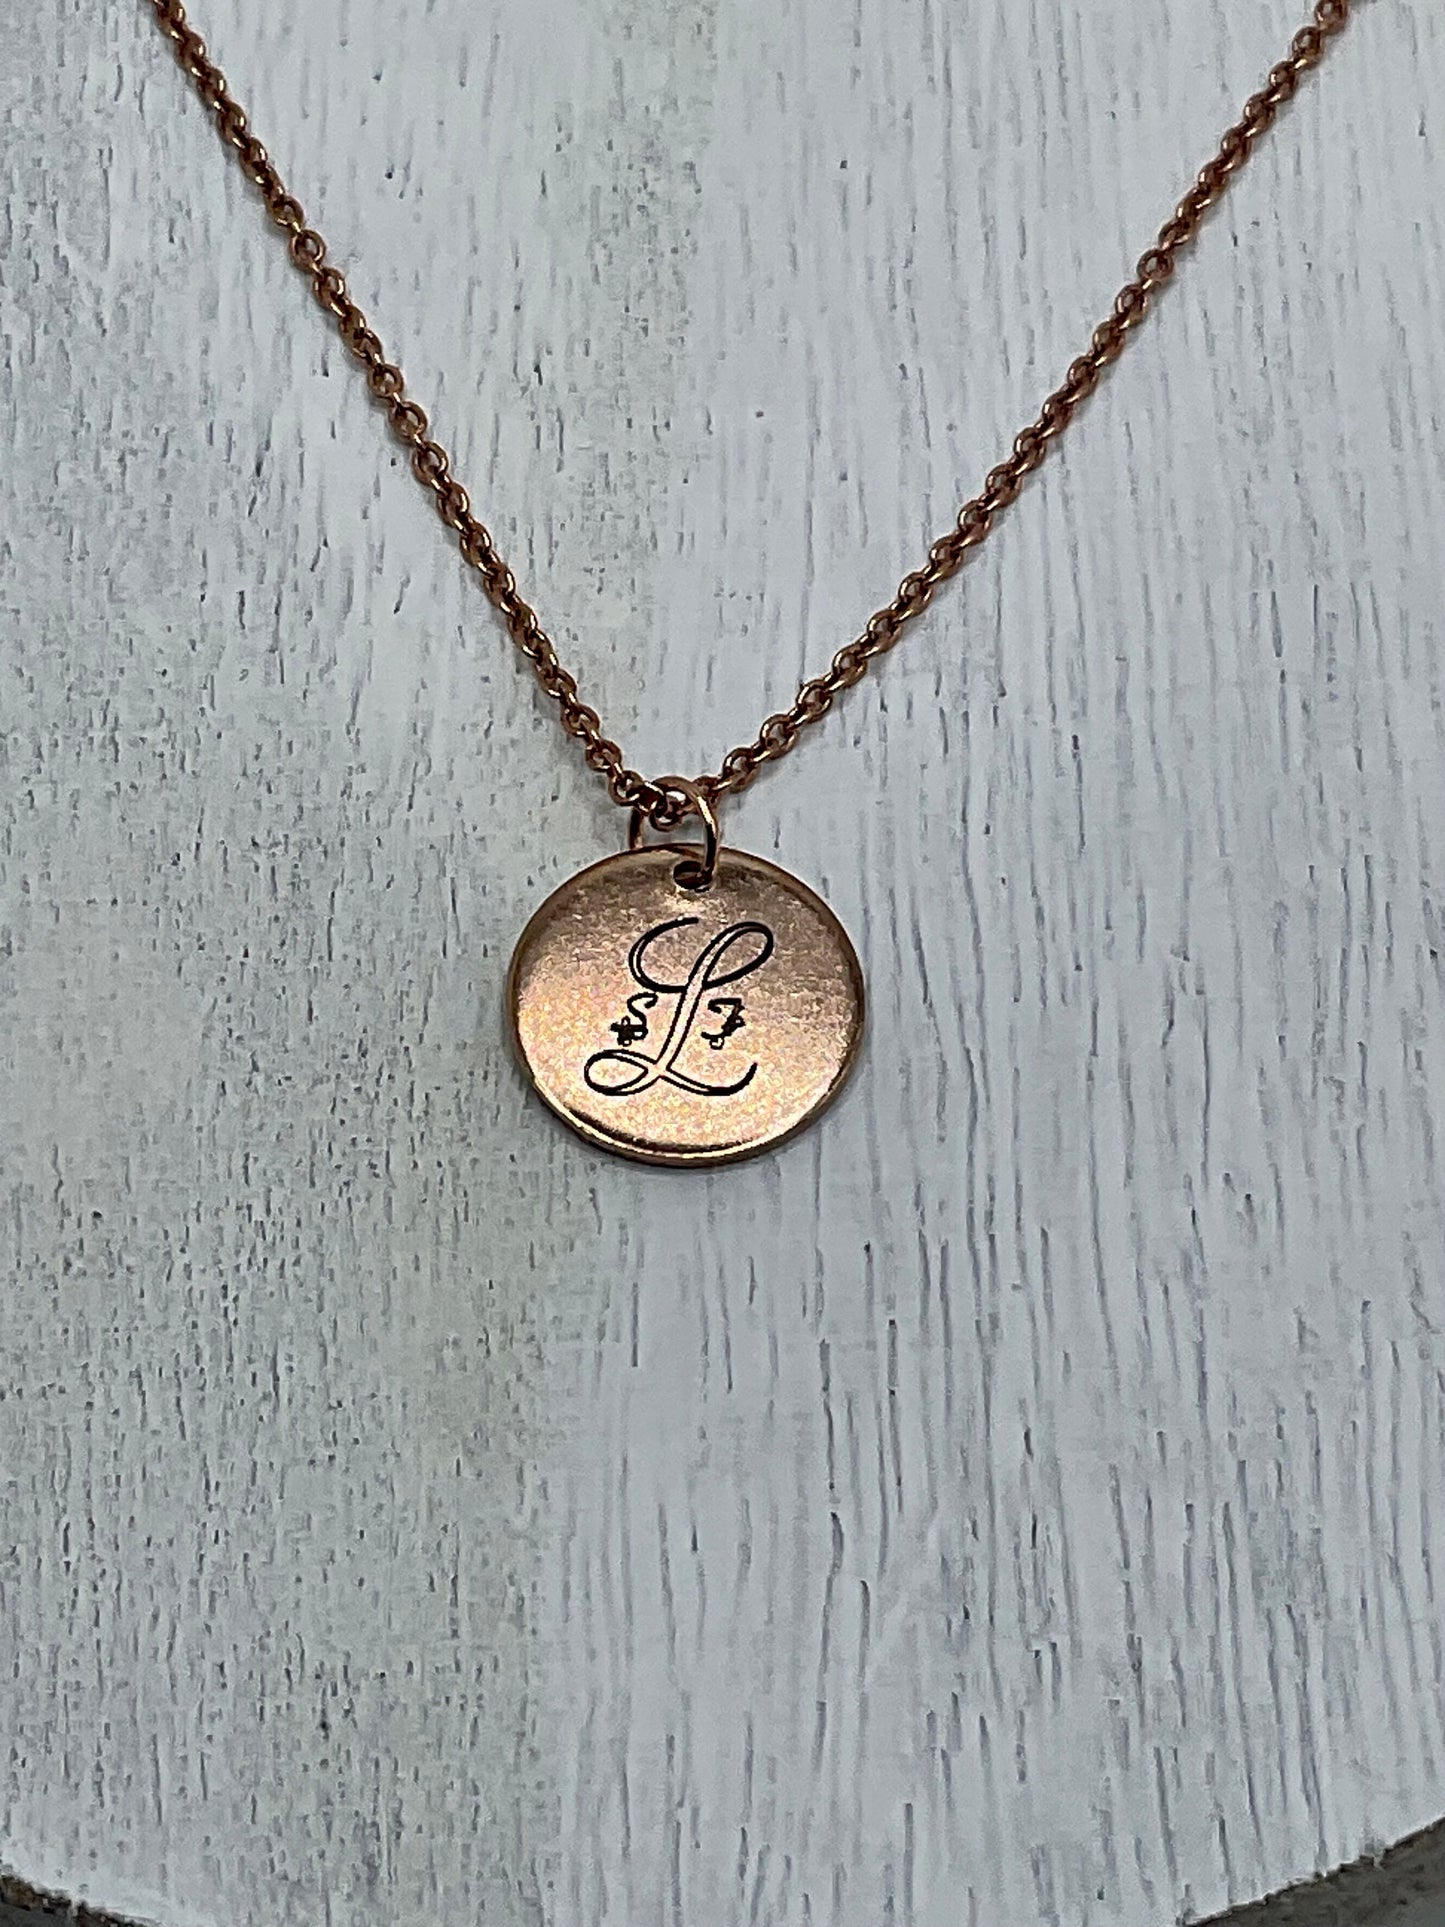 Monogrammed Personalized Rose Gold or Silver Jewelry Charm Necklace